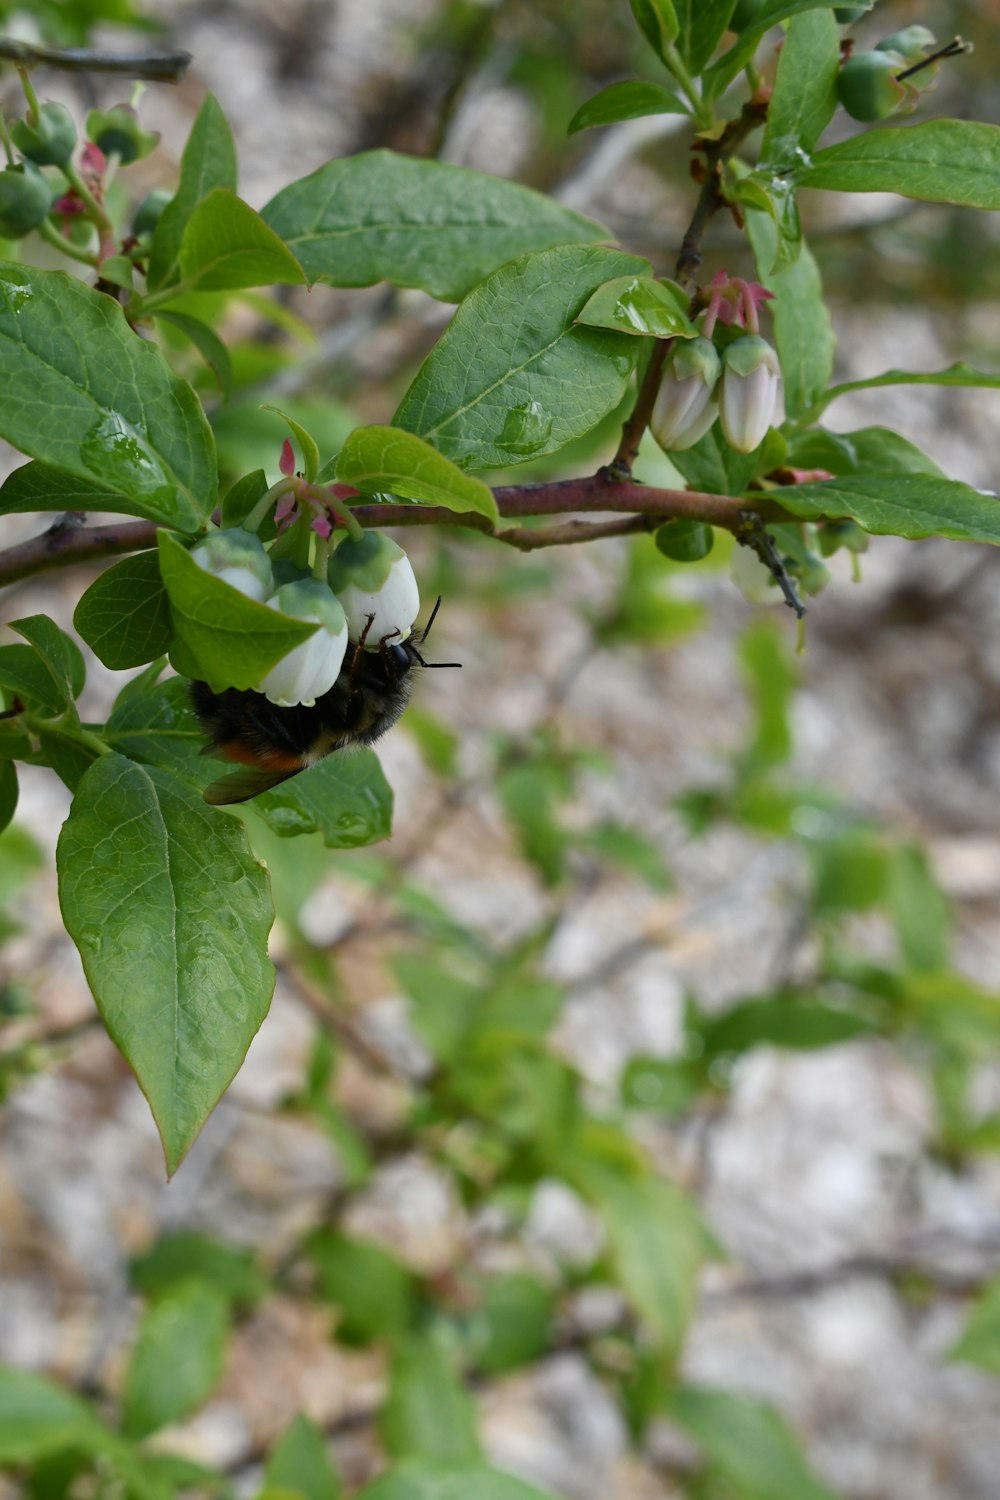 a black and white insect on a branch with green leaves